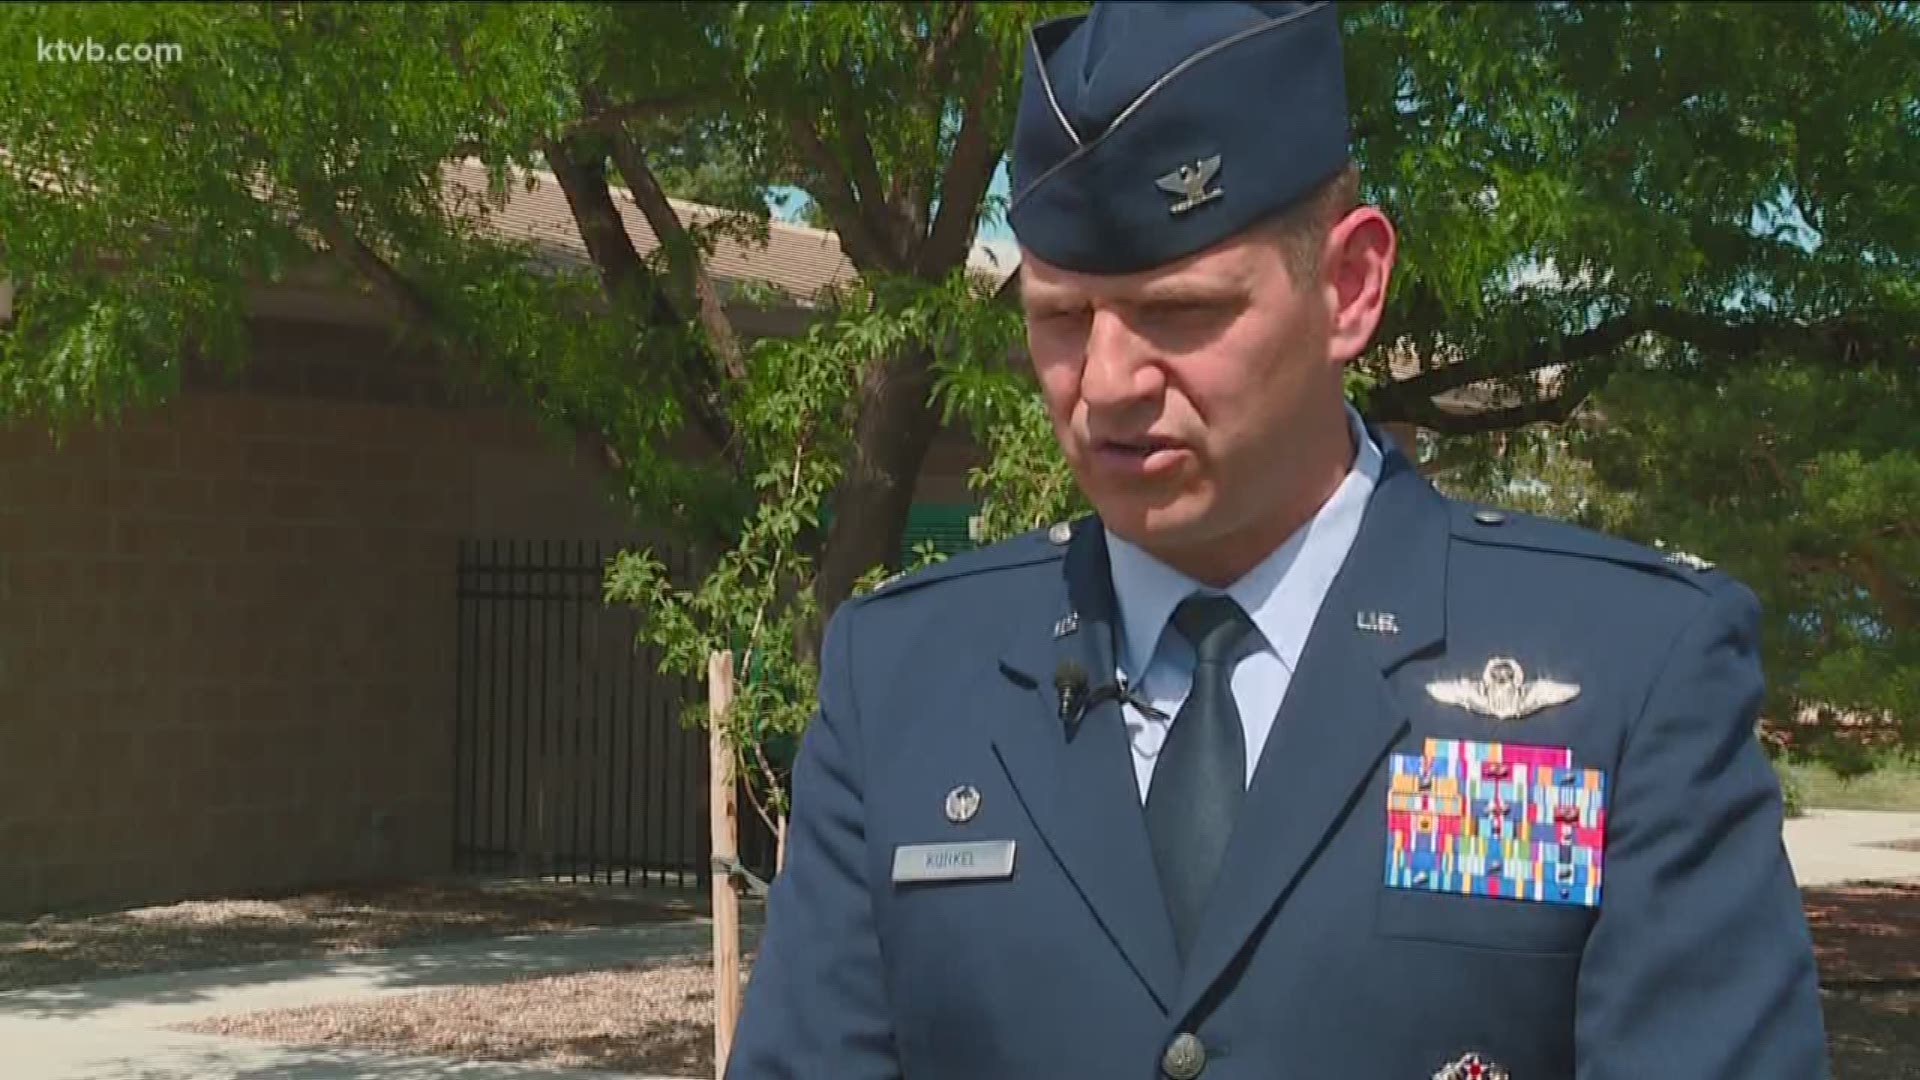 MHAFB gunfighters mourning loss of 3 airmen.